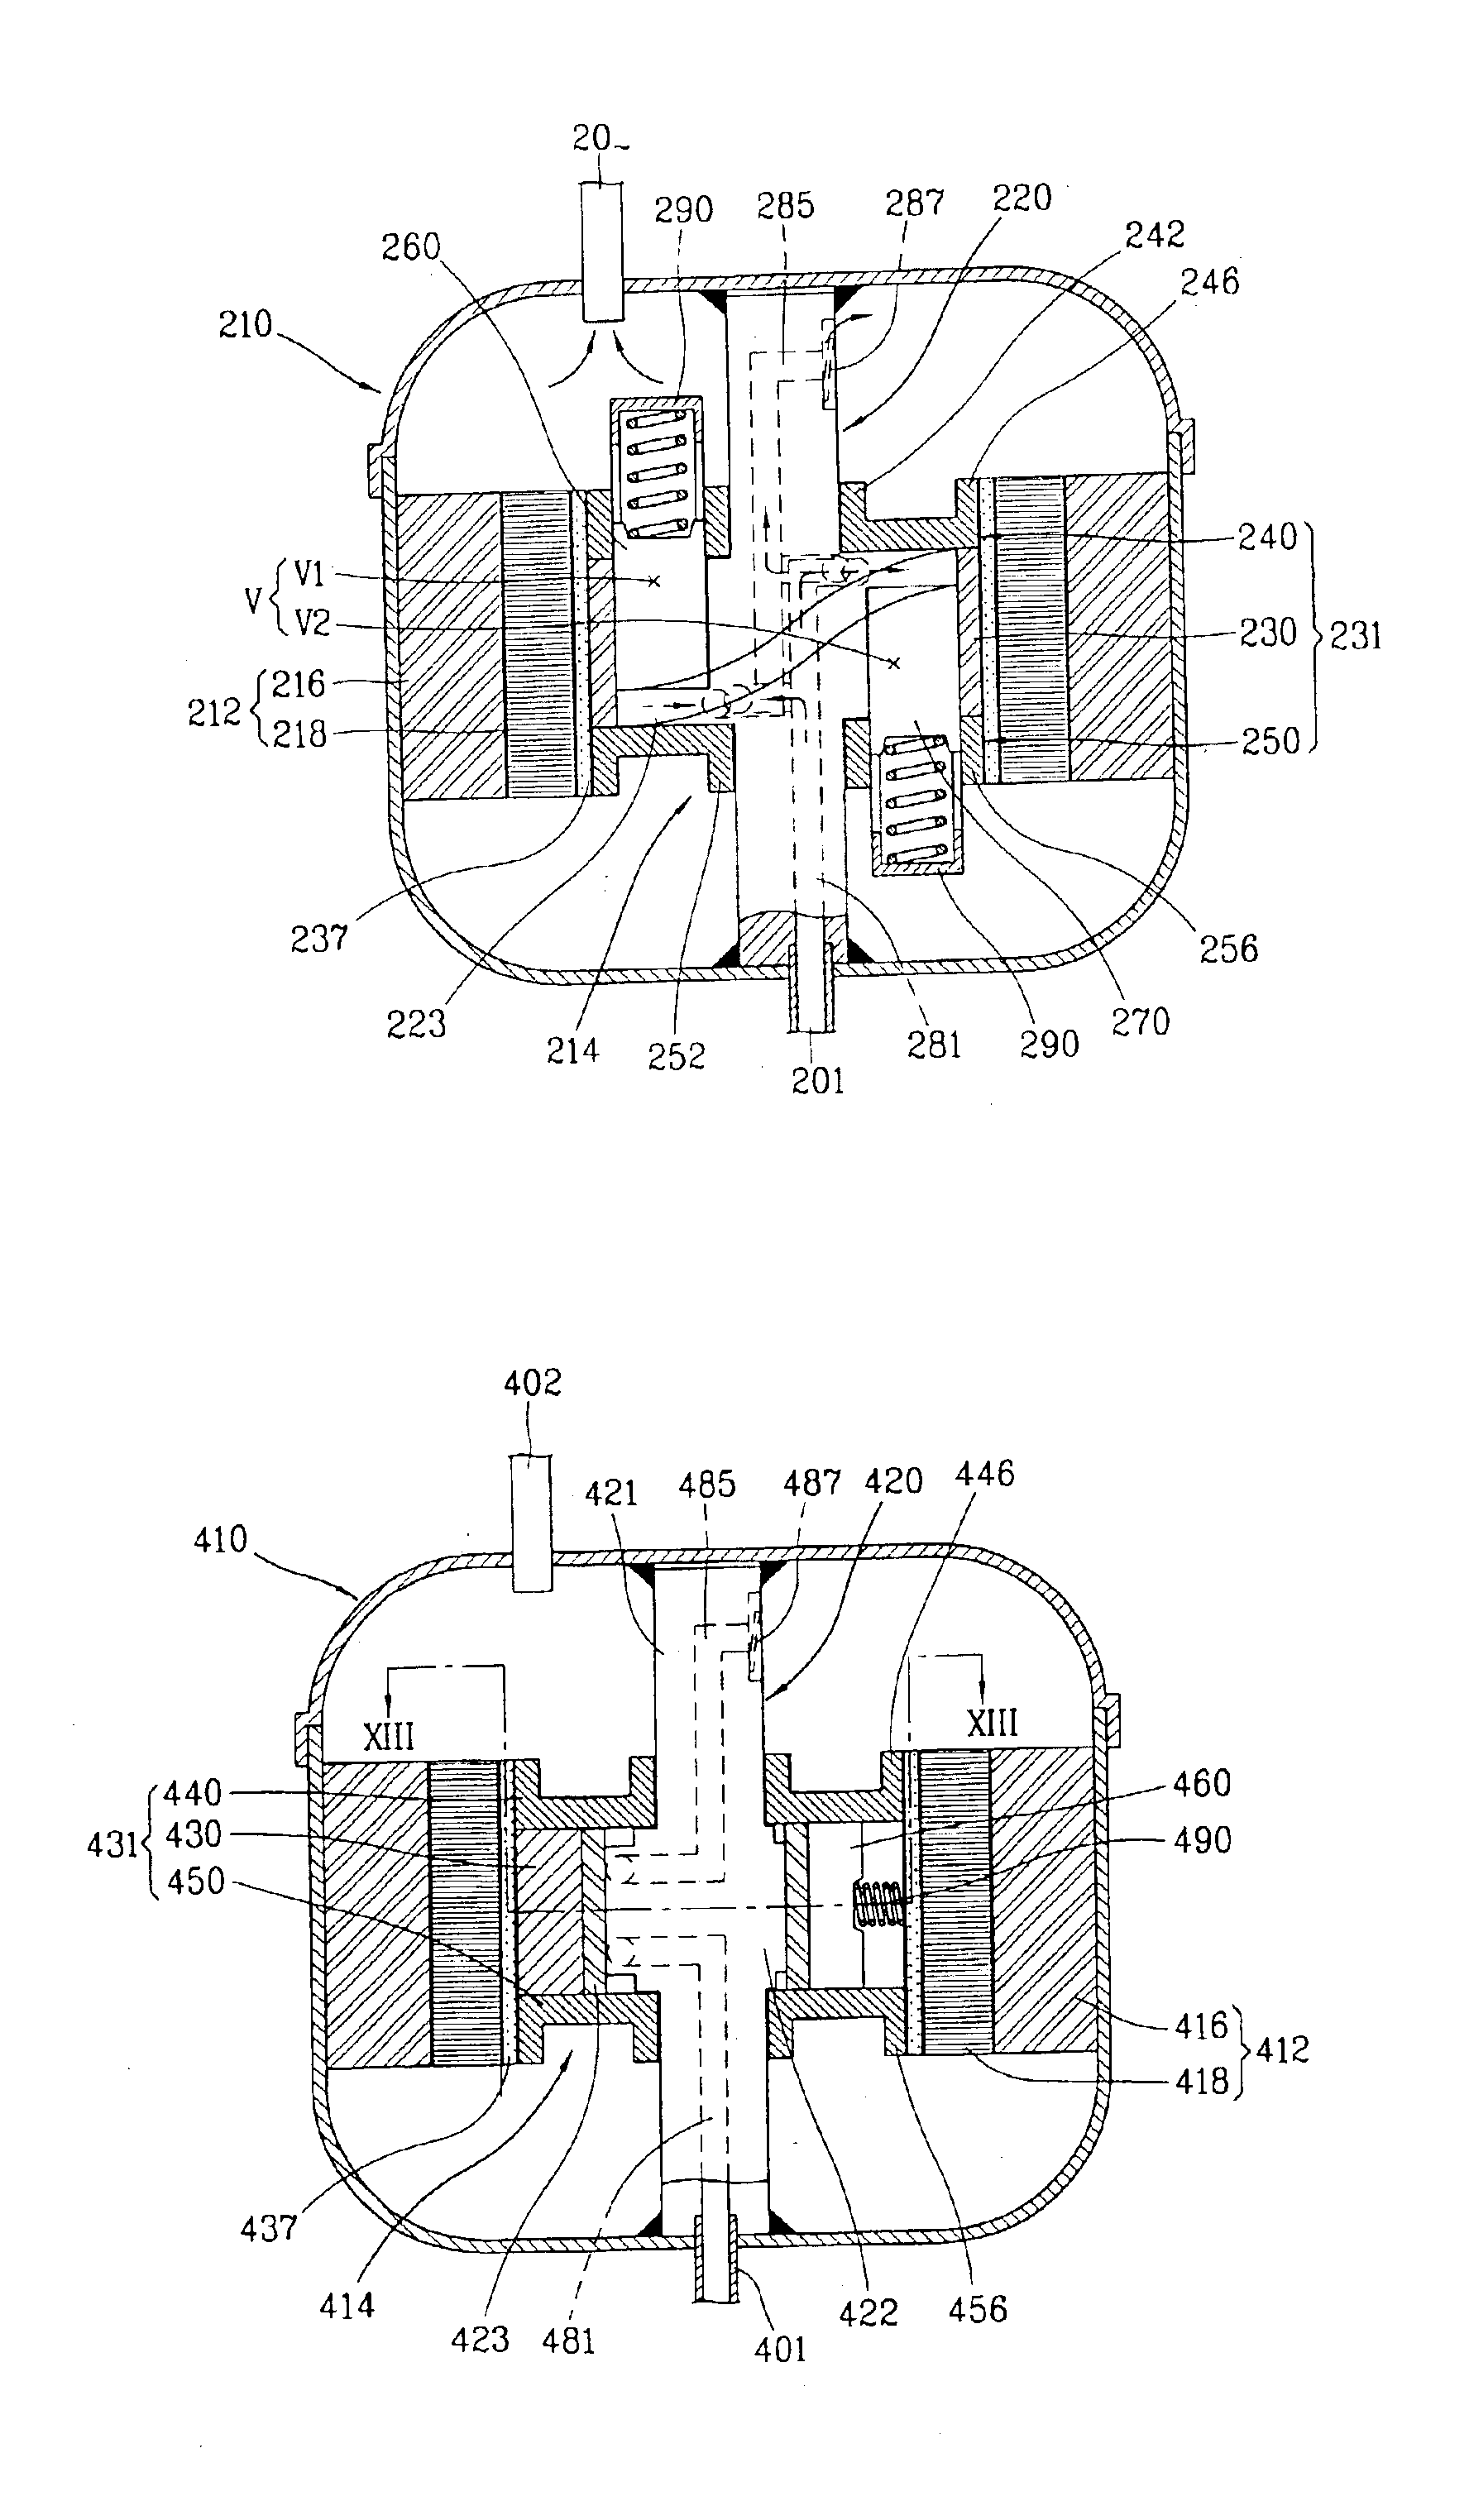 Compressor within motor rotor